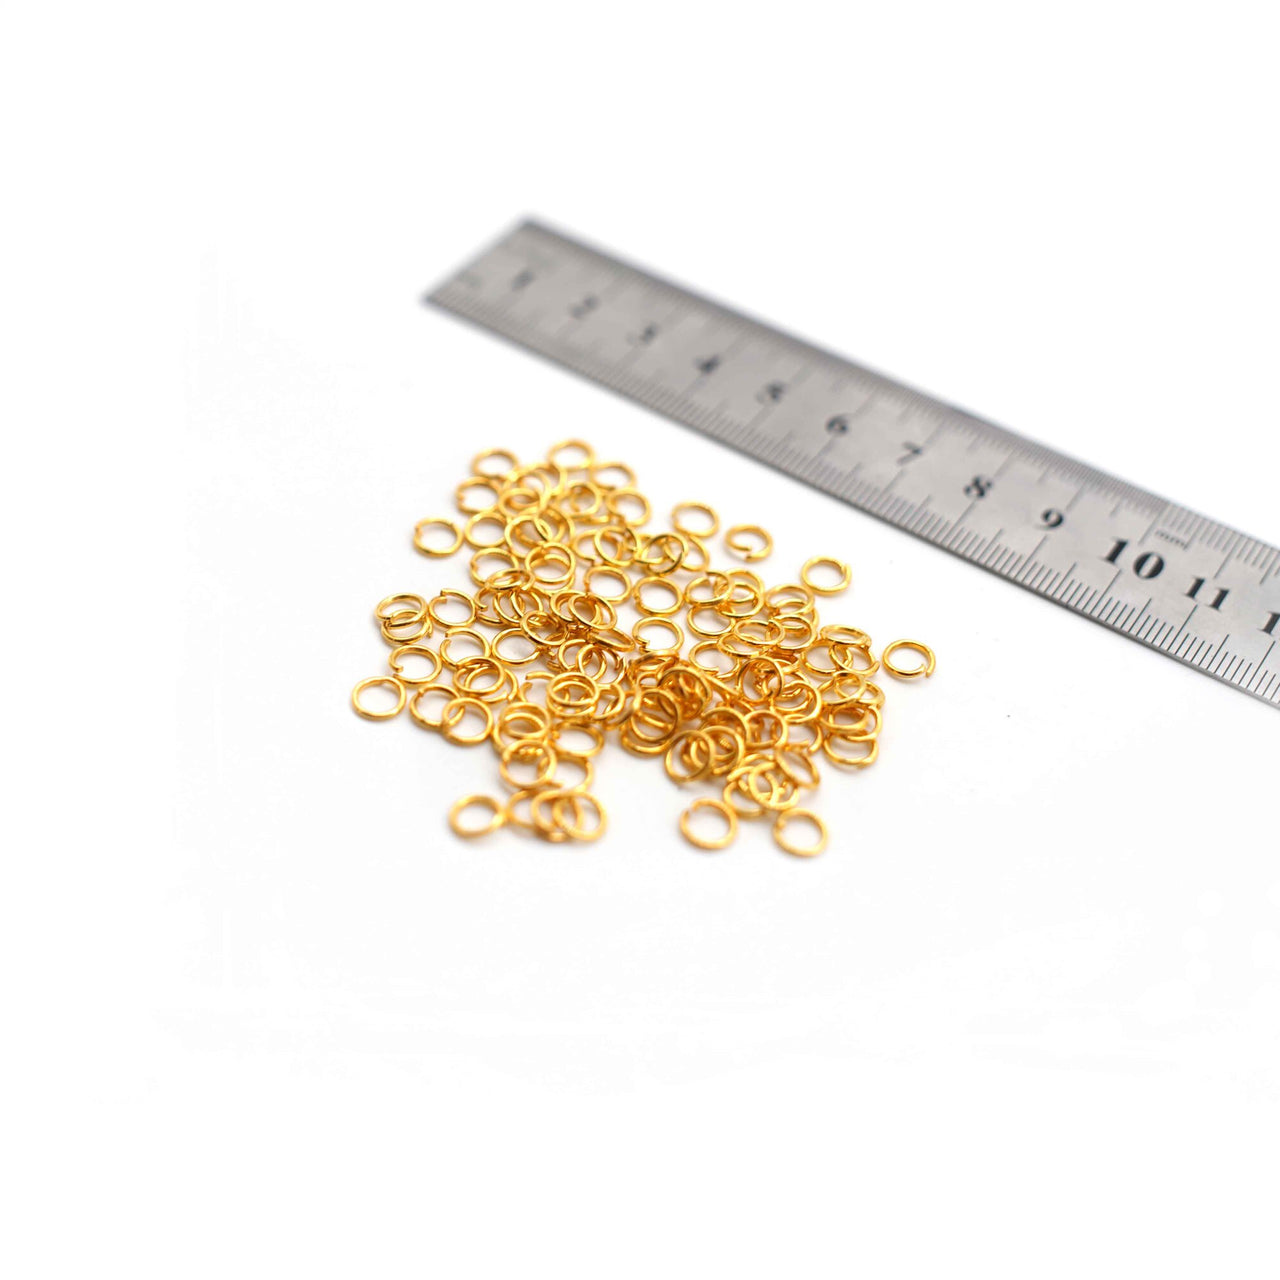 Jump Rings - 6mm - Gold - 50g (Approx. 650 Rings)